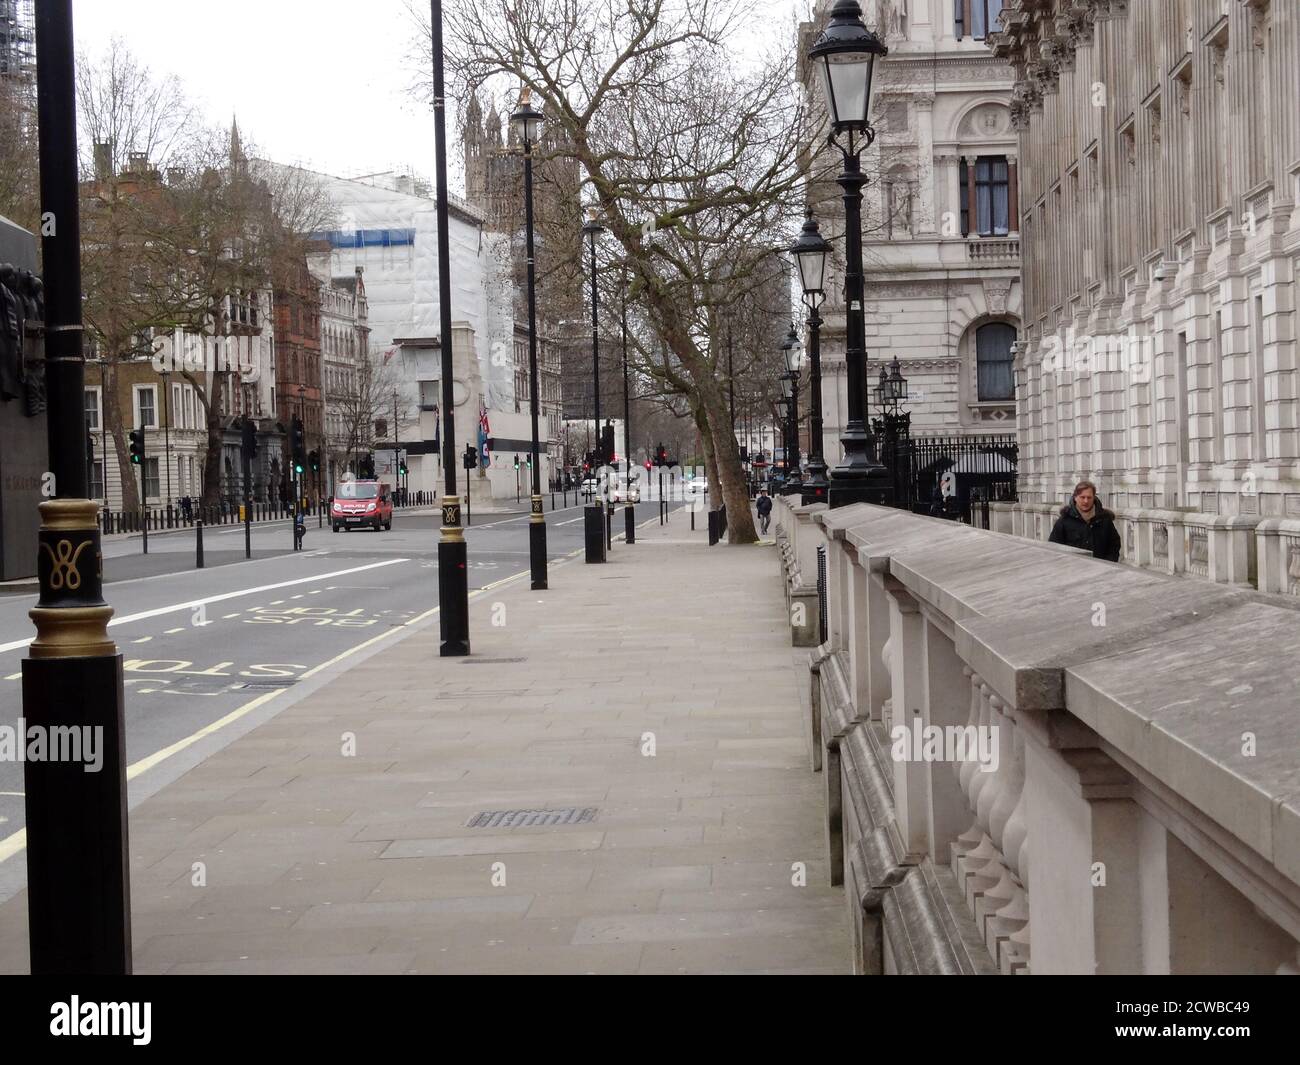 Whitehall London, deserted in late March, during the Corona (COVID-19 ) Virus pandemic March 2020 Stock Photo